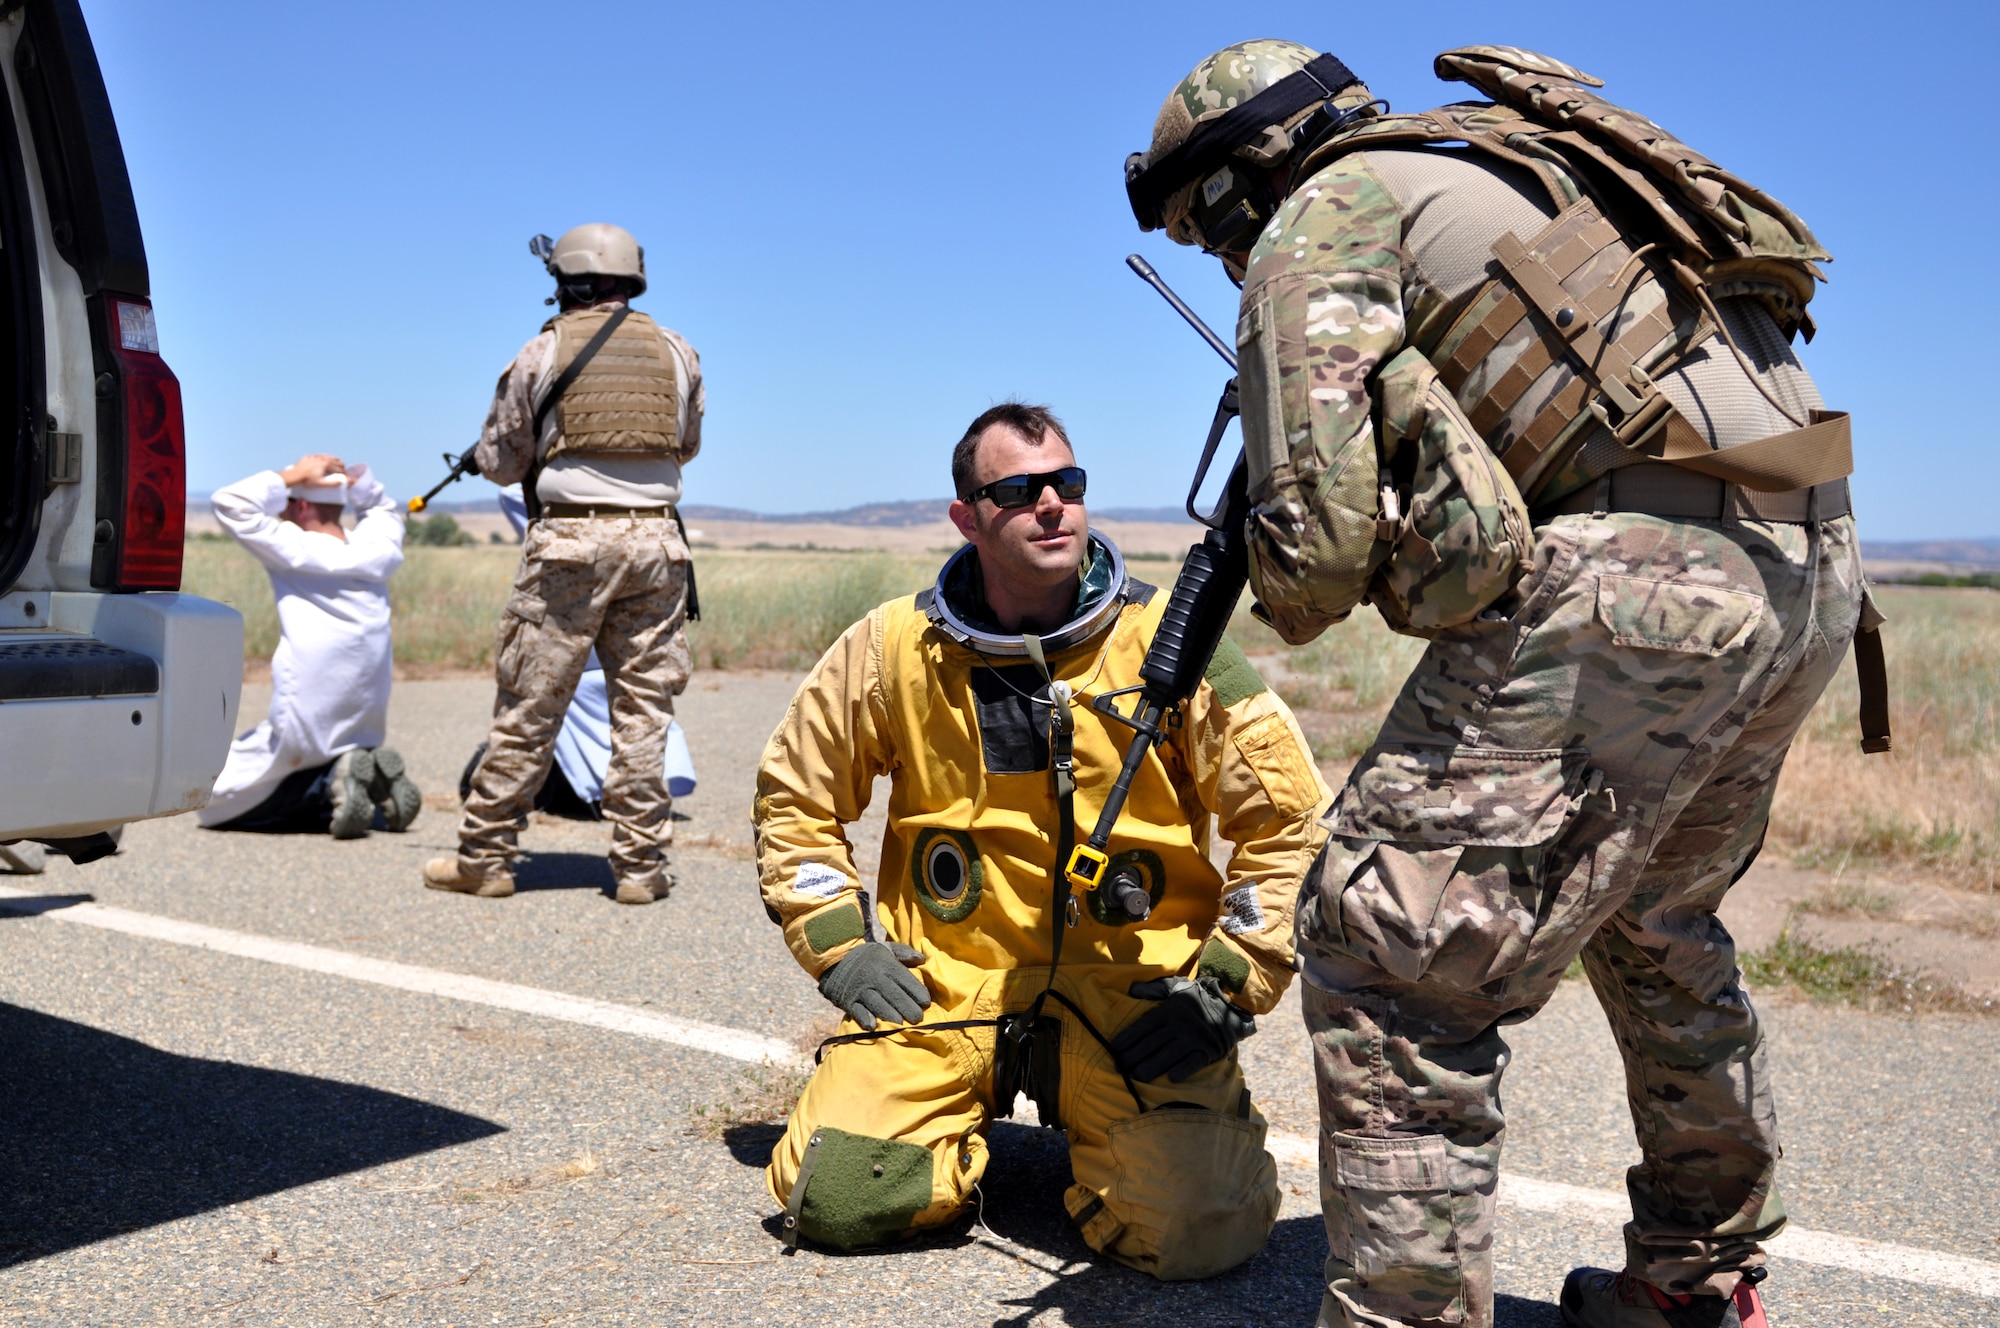 A special operator authenticates the status of a simulated downed U-2 pilot during a combat search and rescue exercise at Beale Air Force Base, Calif., May 31, 2013.  (U.S. Air Force photo by Robert Scott/Released)